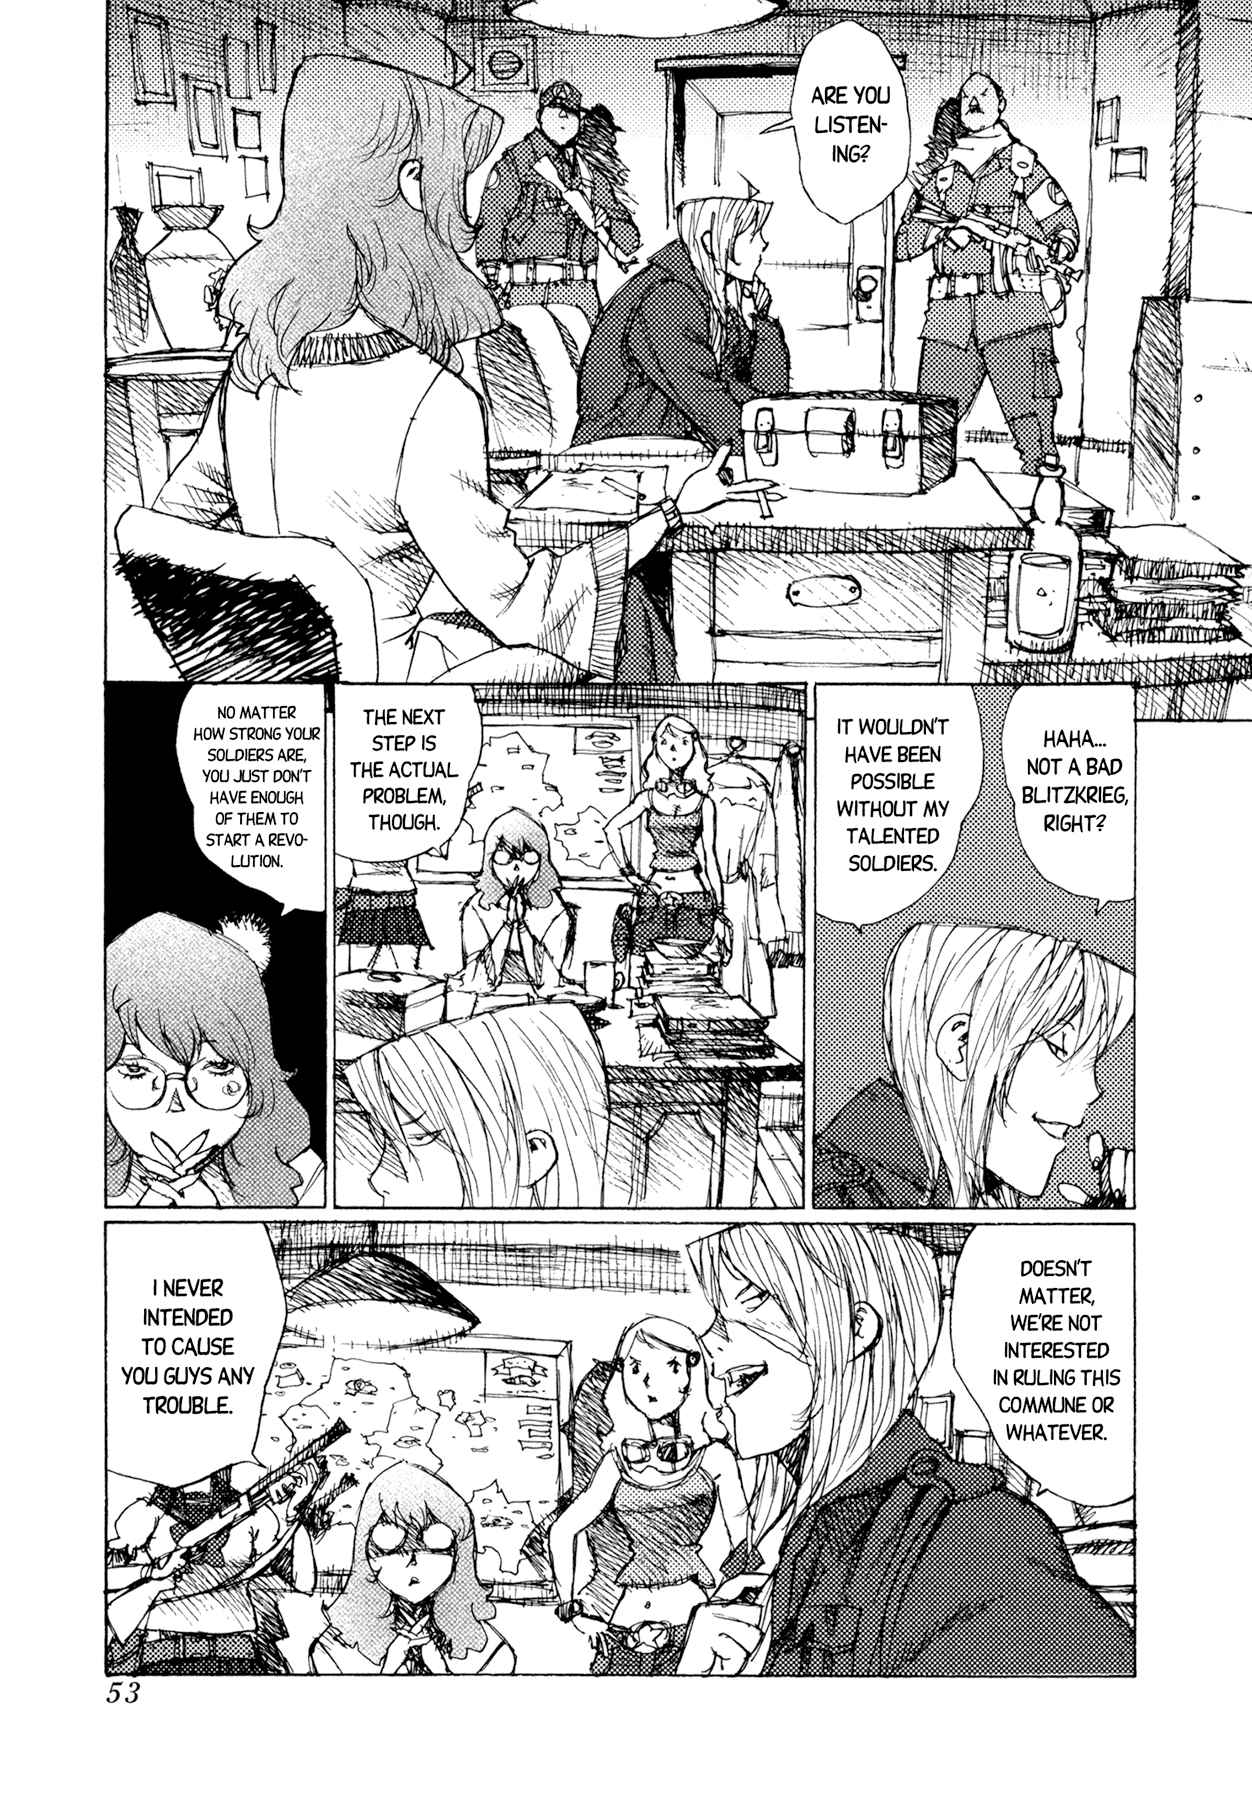 Alice from Hell Vol. 5 Ch. 31 That's Pretty Funny